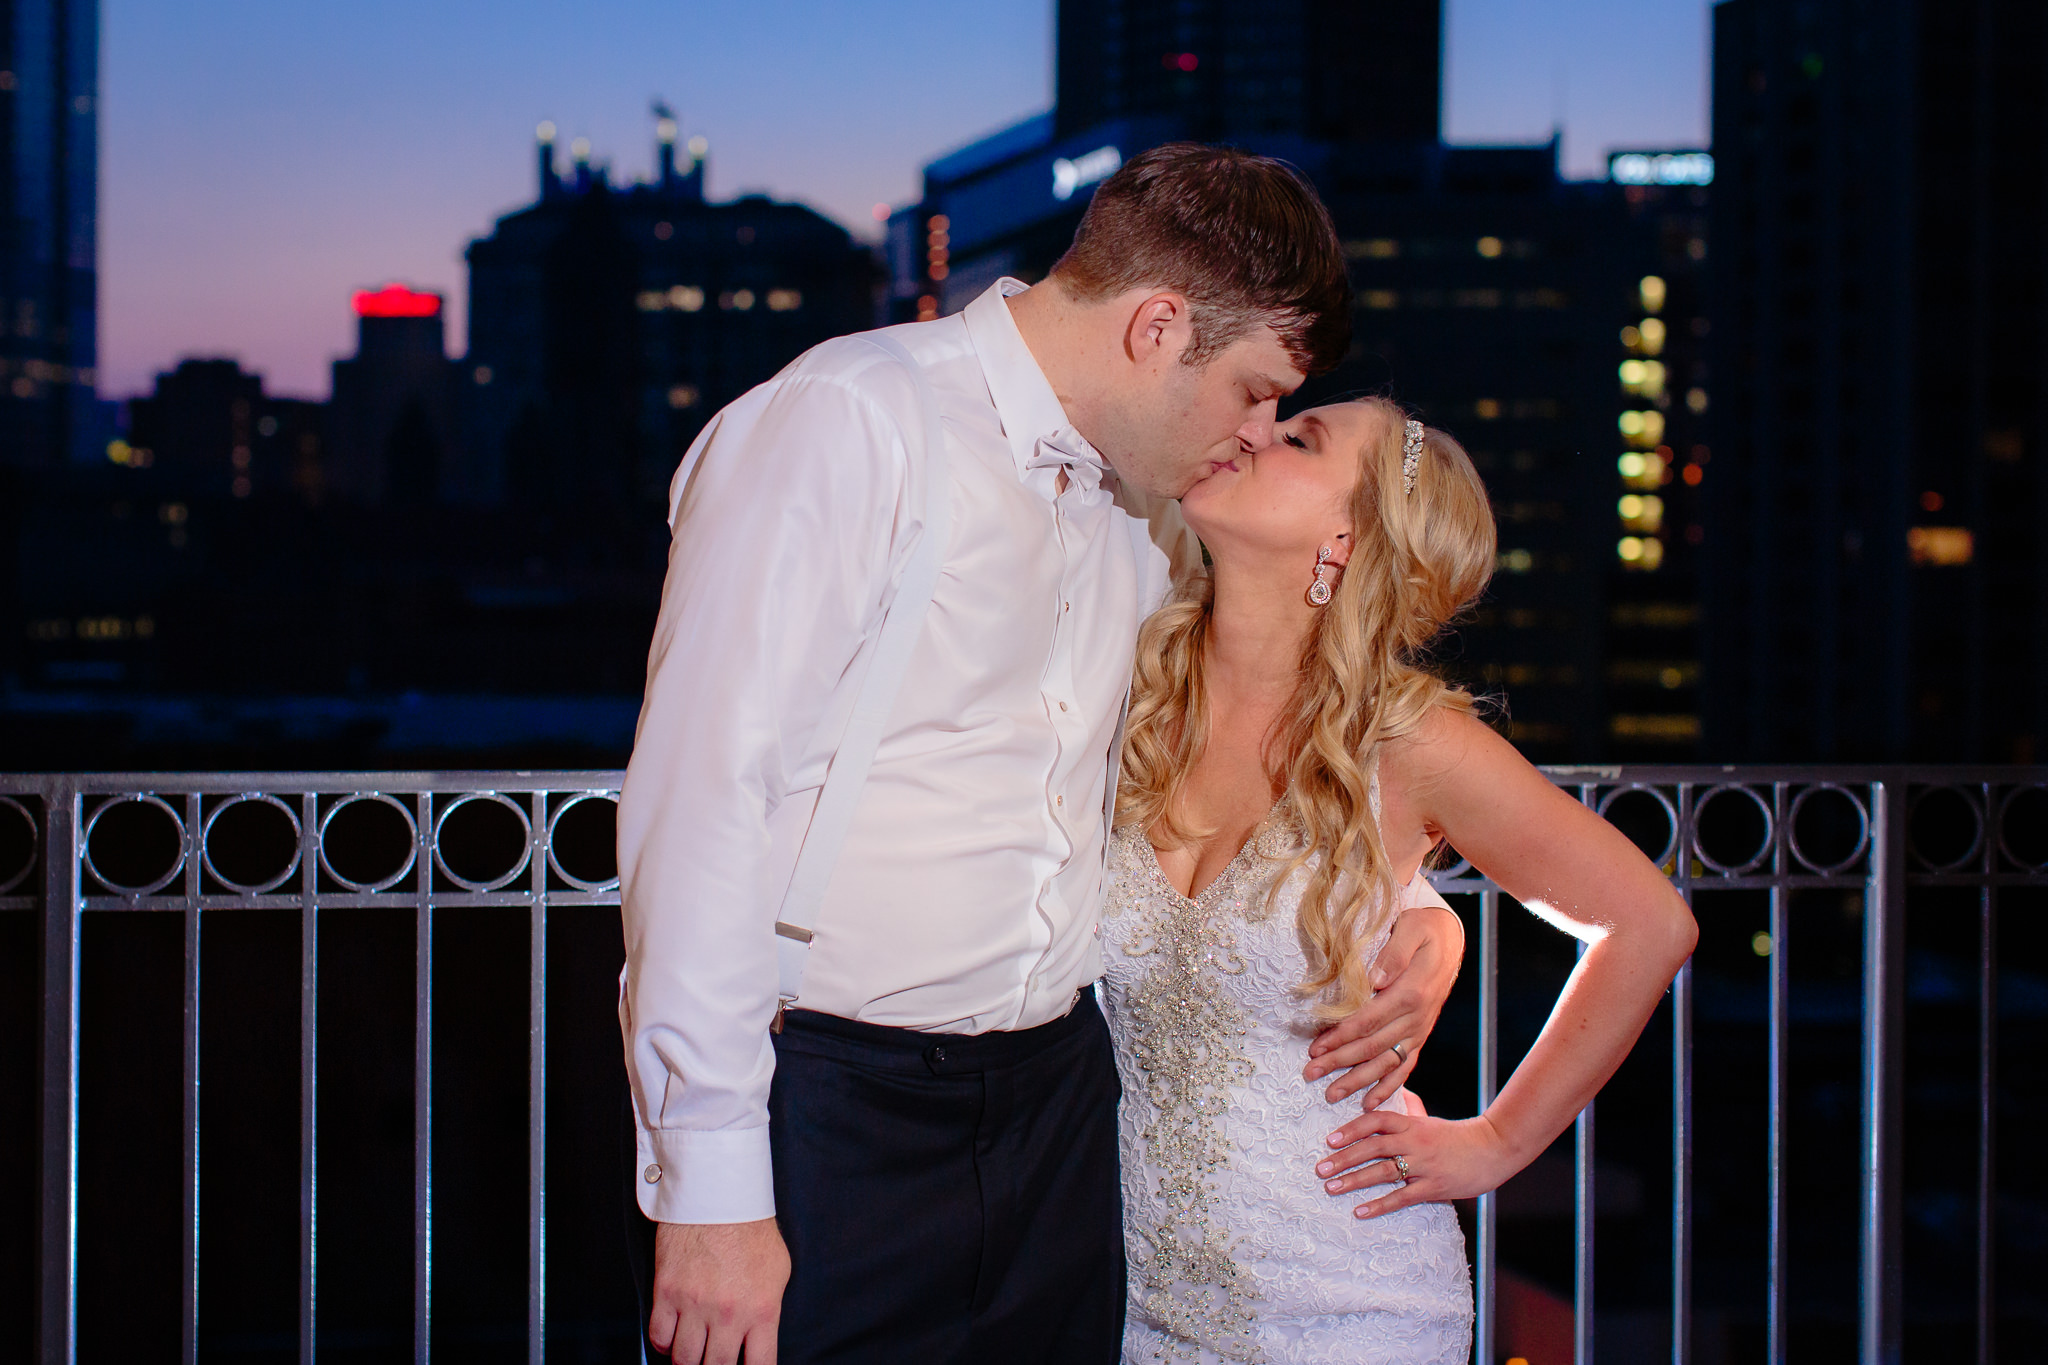 Newlyweds kiss at dusk on the patio of the Duquesne University Power Center ballroom